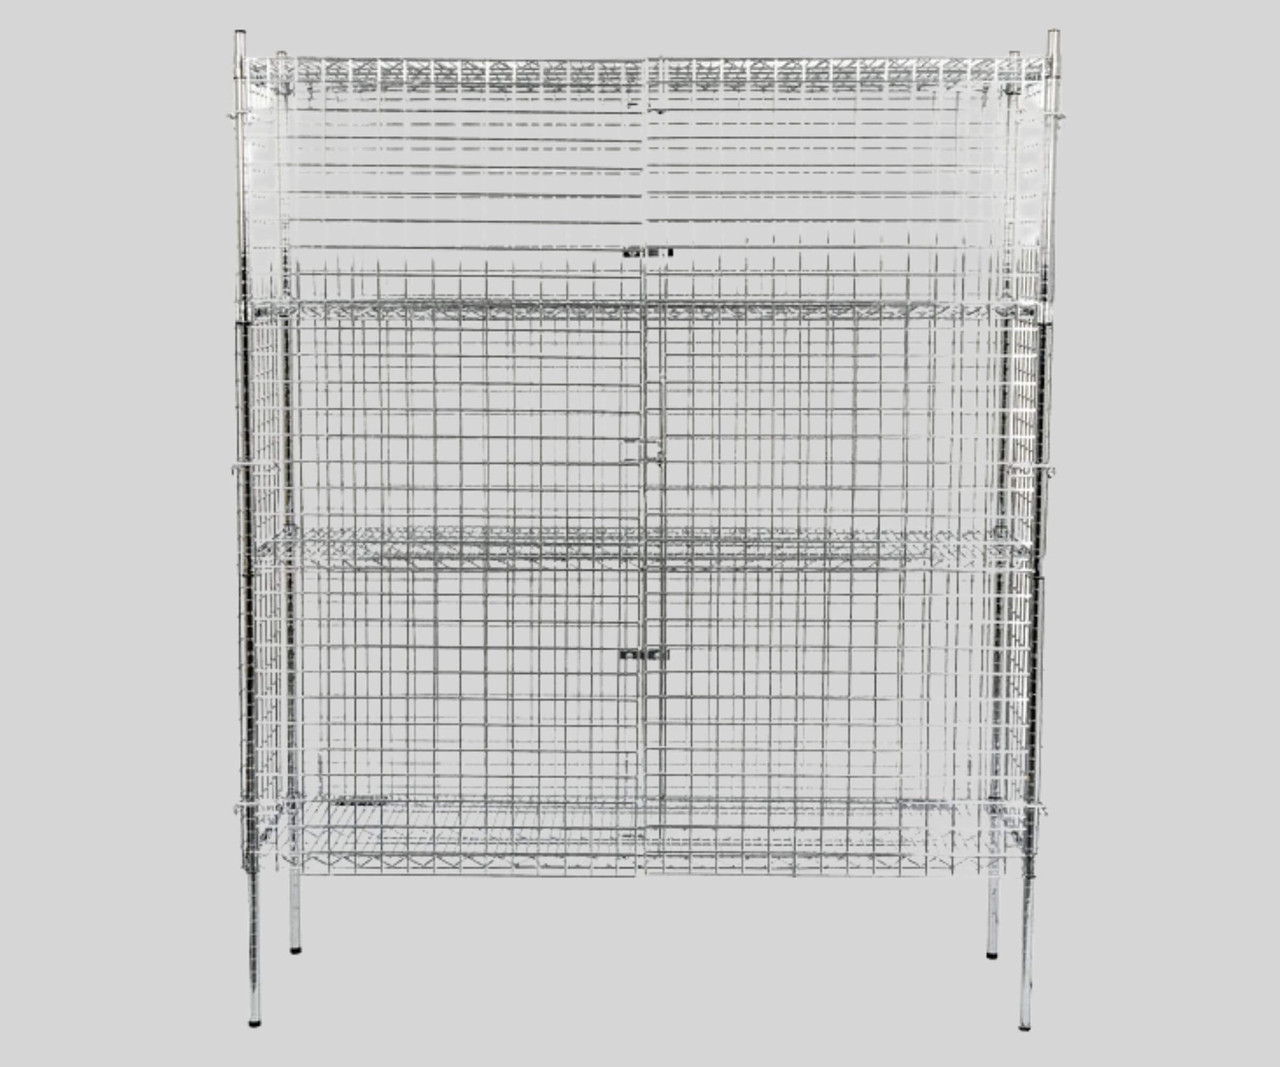 Chicken Pieces CP NSF Stationary Chrome Wire Security Cage Kit - 18" x 60" x 74" | Sturdy Storage Solution